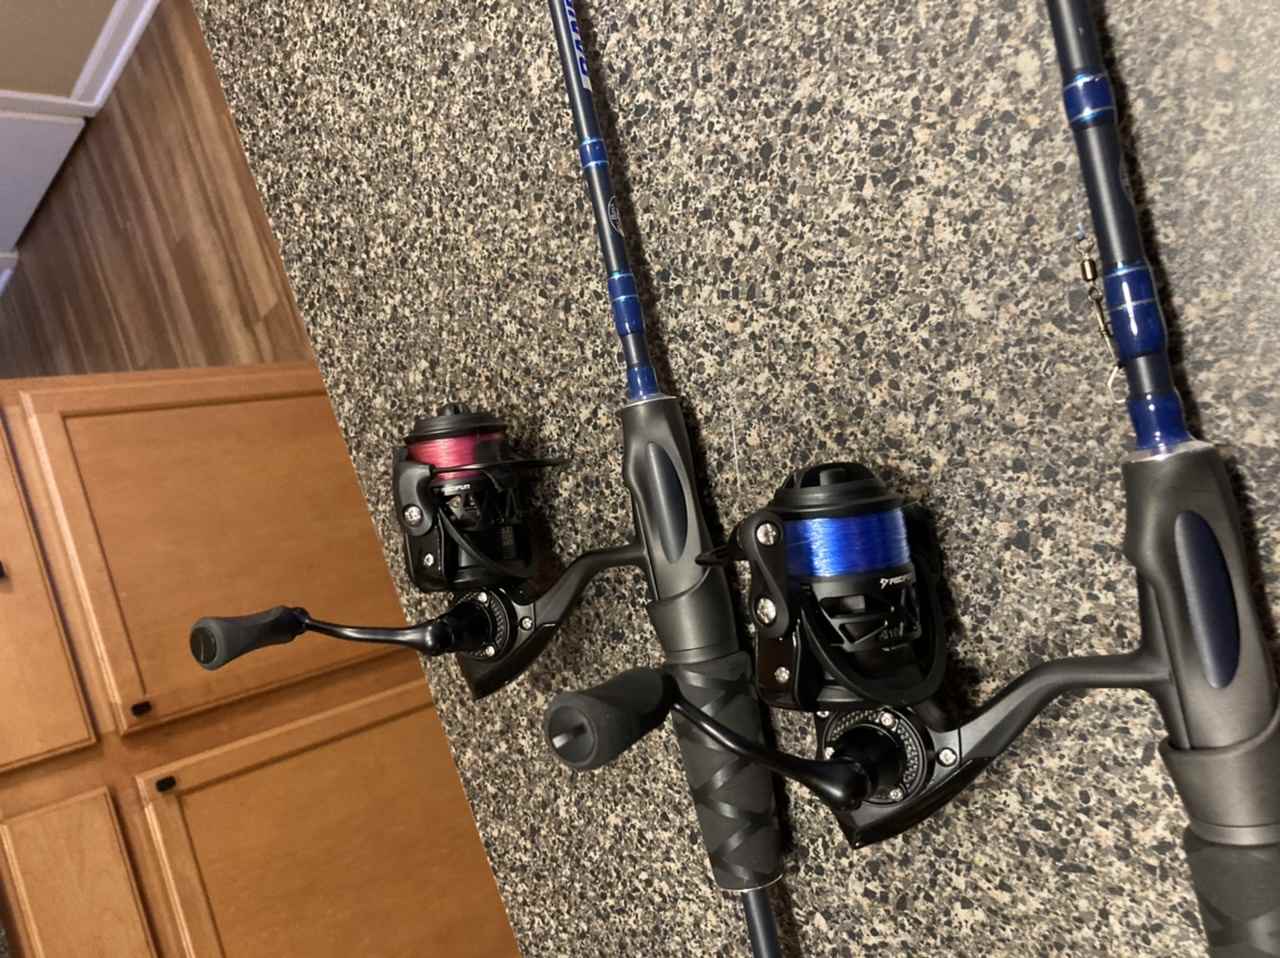 Any Kastking fans out there? - Fishing Rods, Reels, Line, and Knots - Bass  Fishing Forums